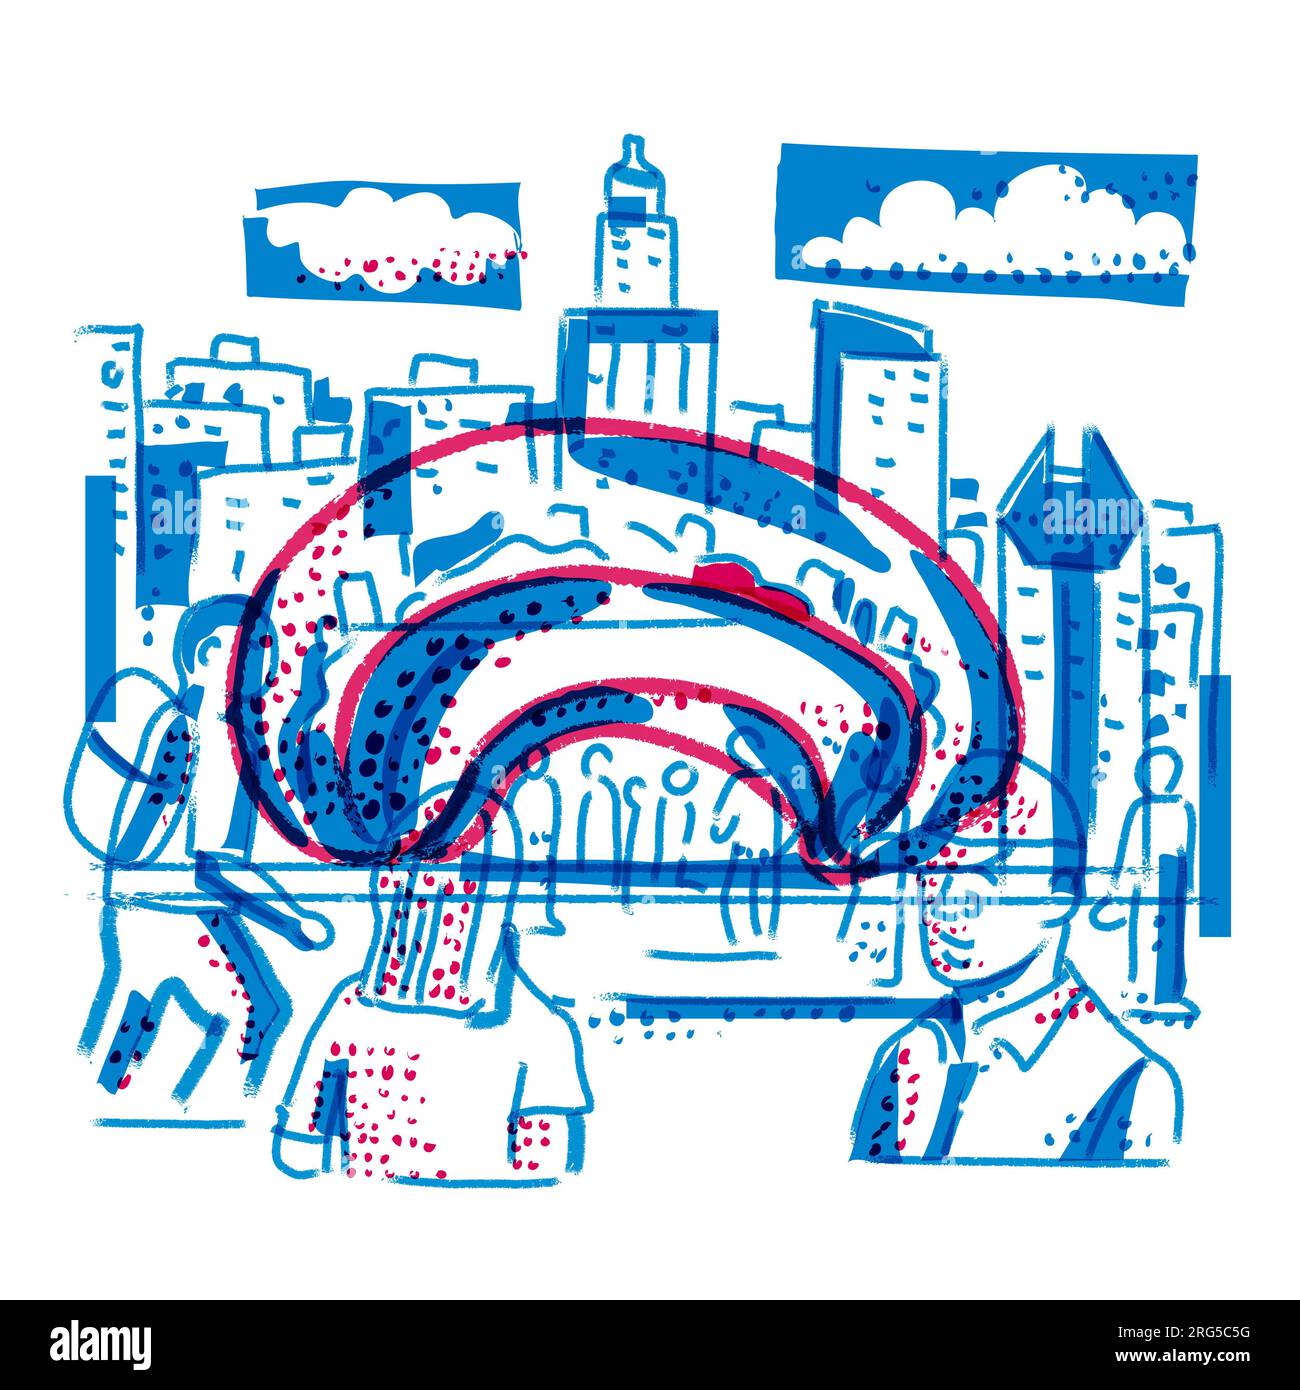 Risograph technique illustration of The Bean or Cloud Gate with Chicago City skyline in the background done in retro riso effect digital screen printi Stock Photo